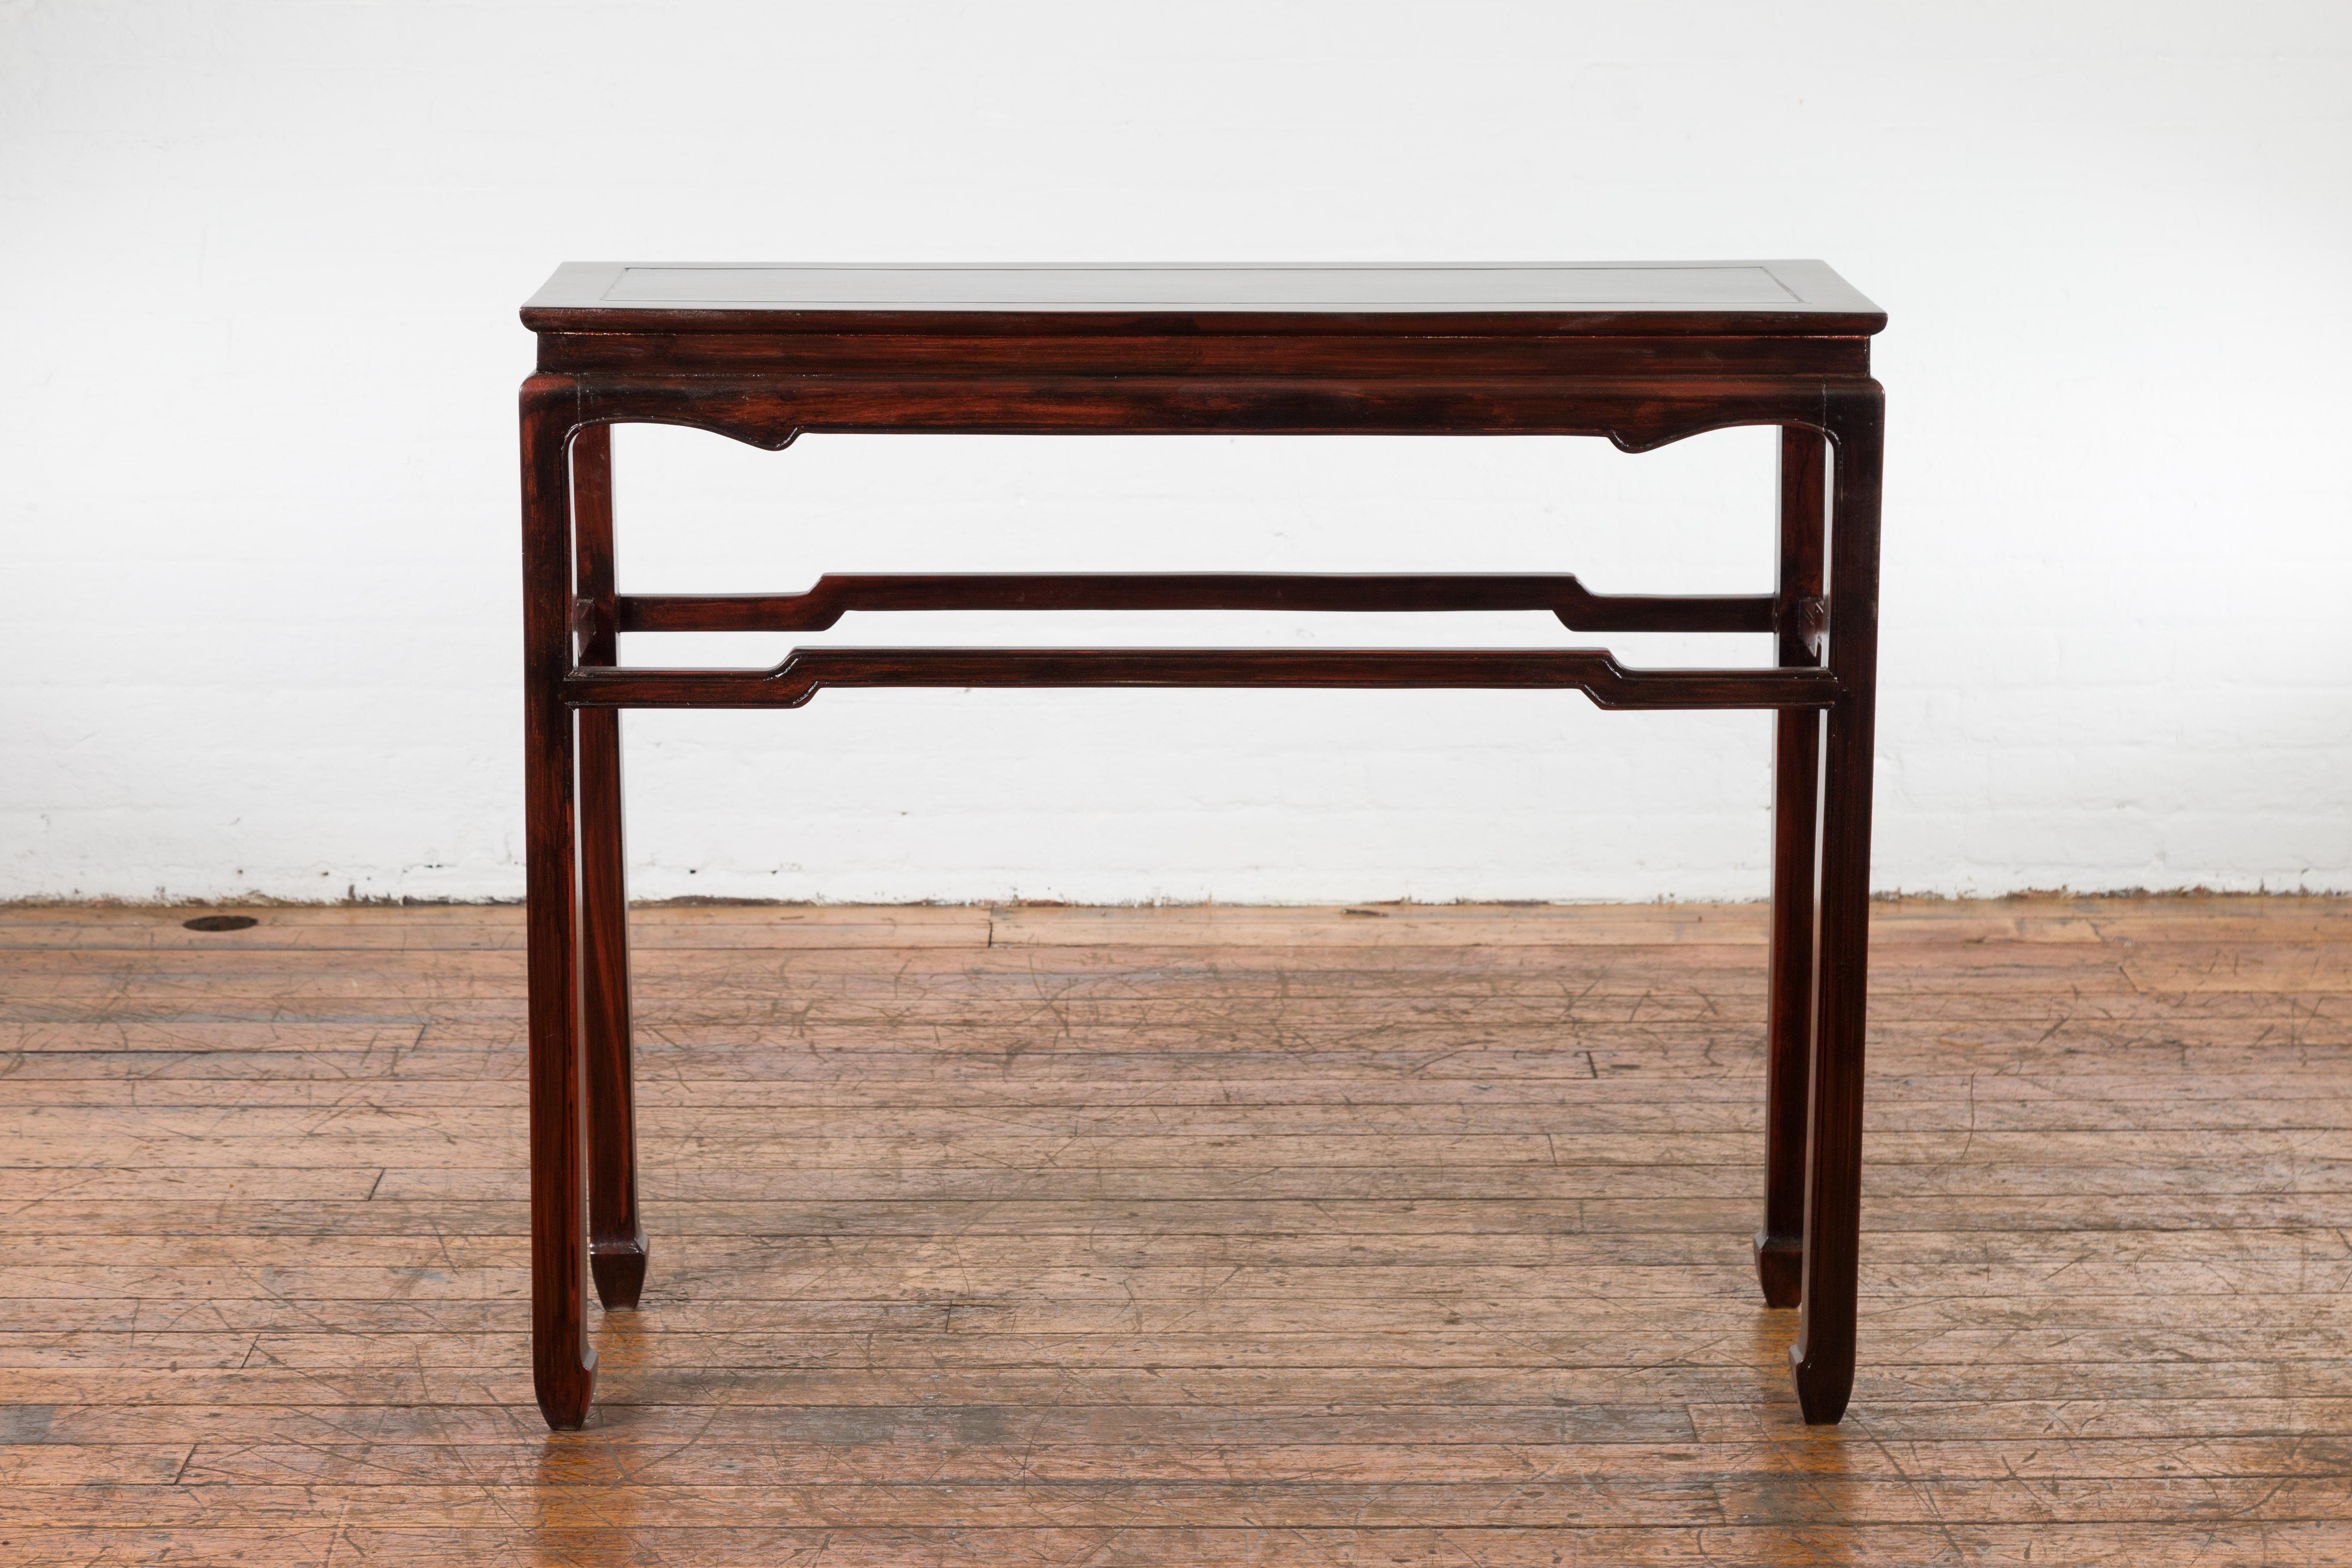 A vintage Chinese style Thai wine console table from the Mid-20th Century, with reddish brown new custom lacquer, waisted top, carved apron, hump back stretchers and horse hoof legs. Created in Thailand during the midcentury period, this wooden